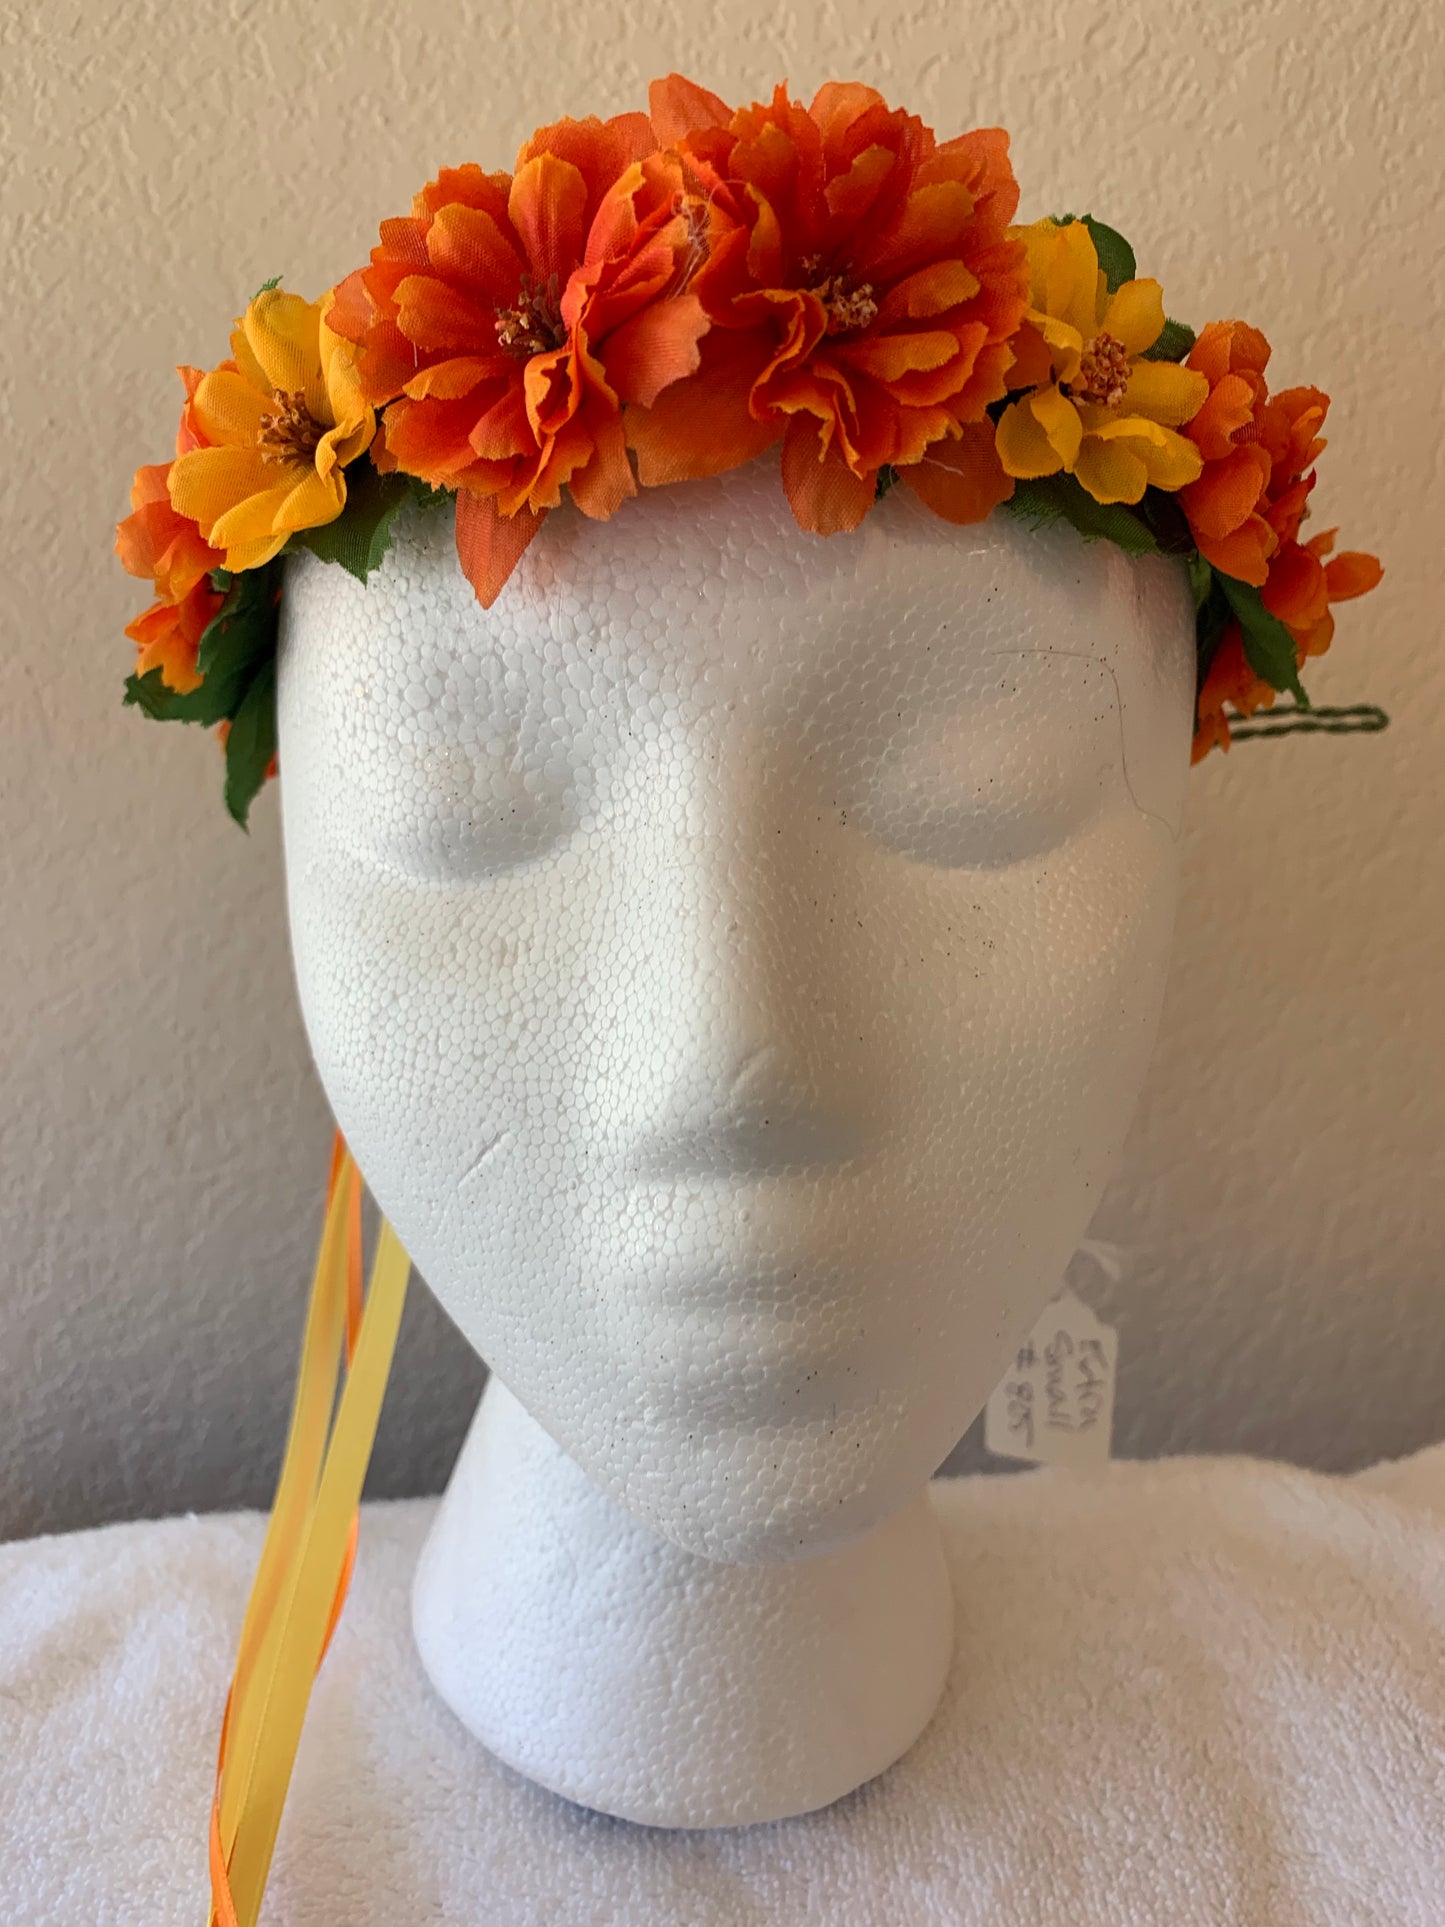 Extra Small Wreath - Bright Yellow and Orange Flowers